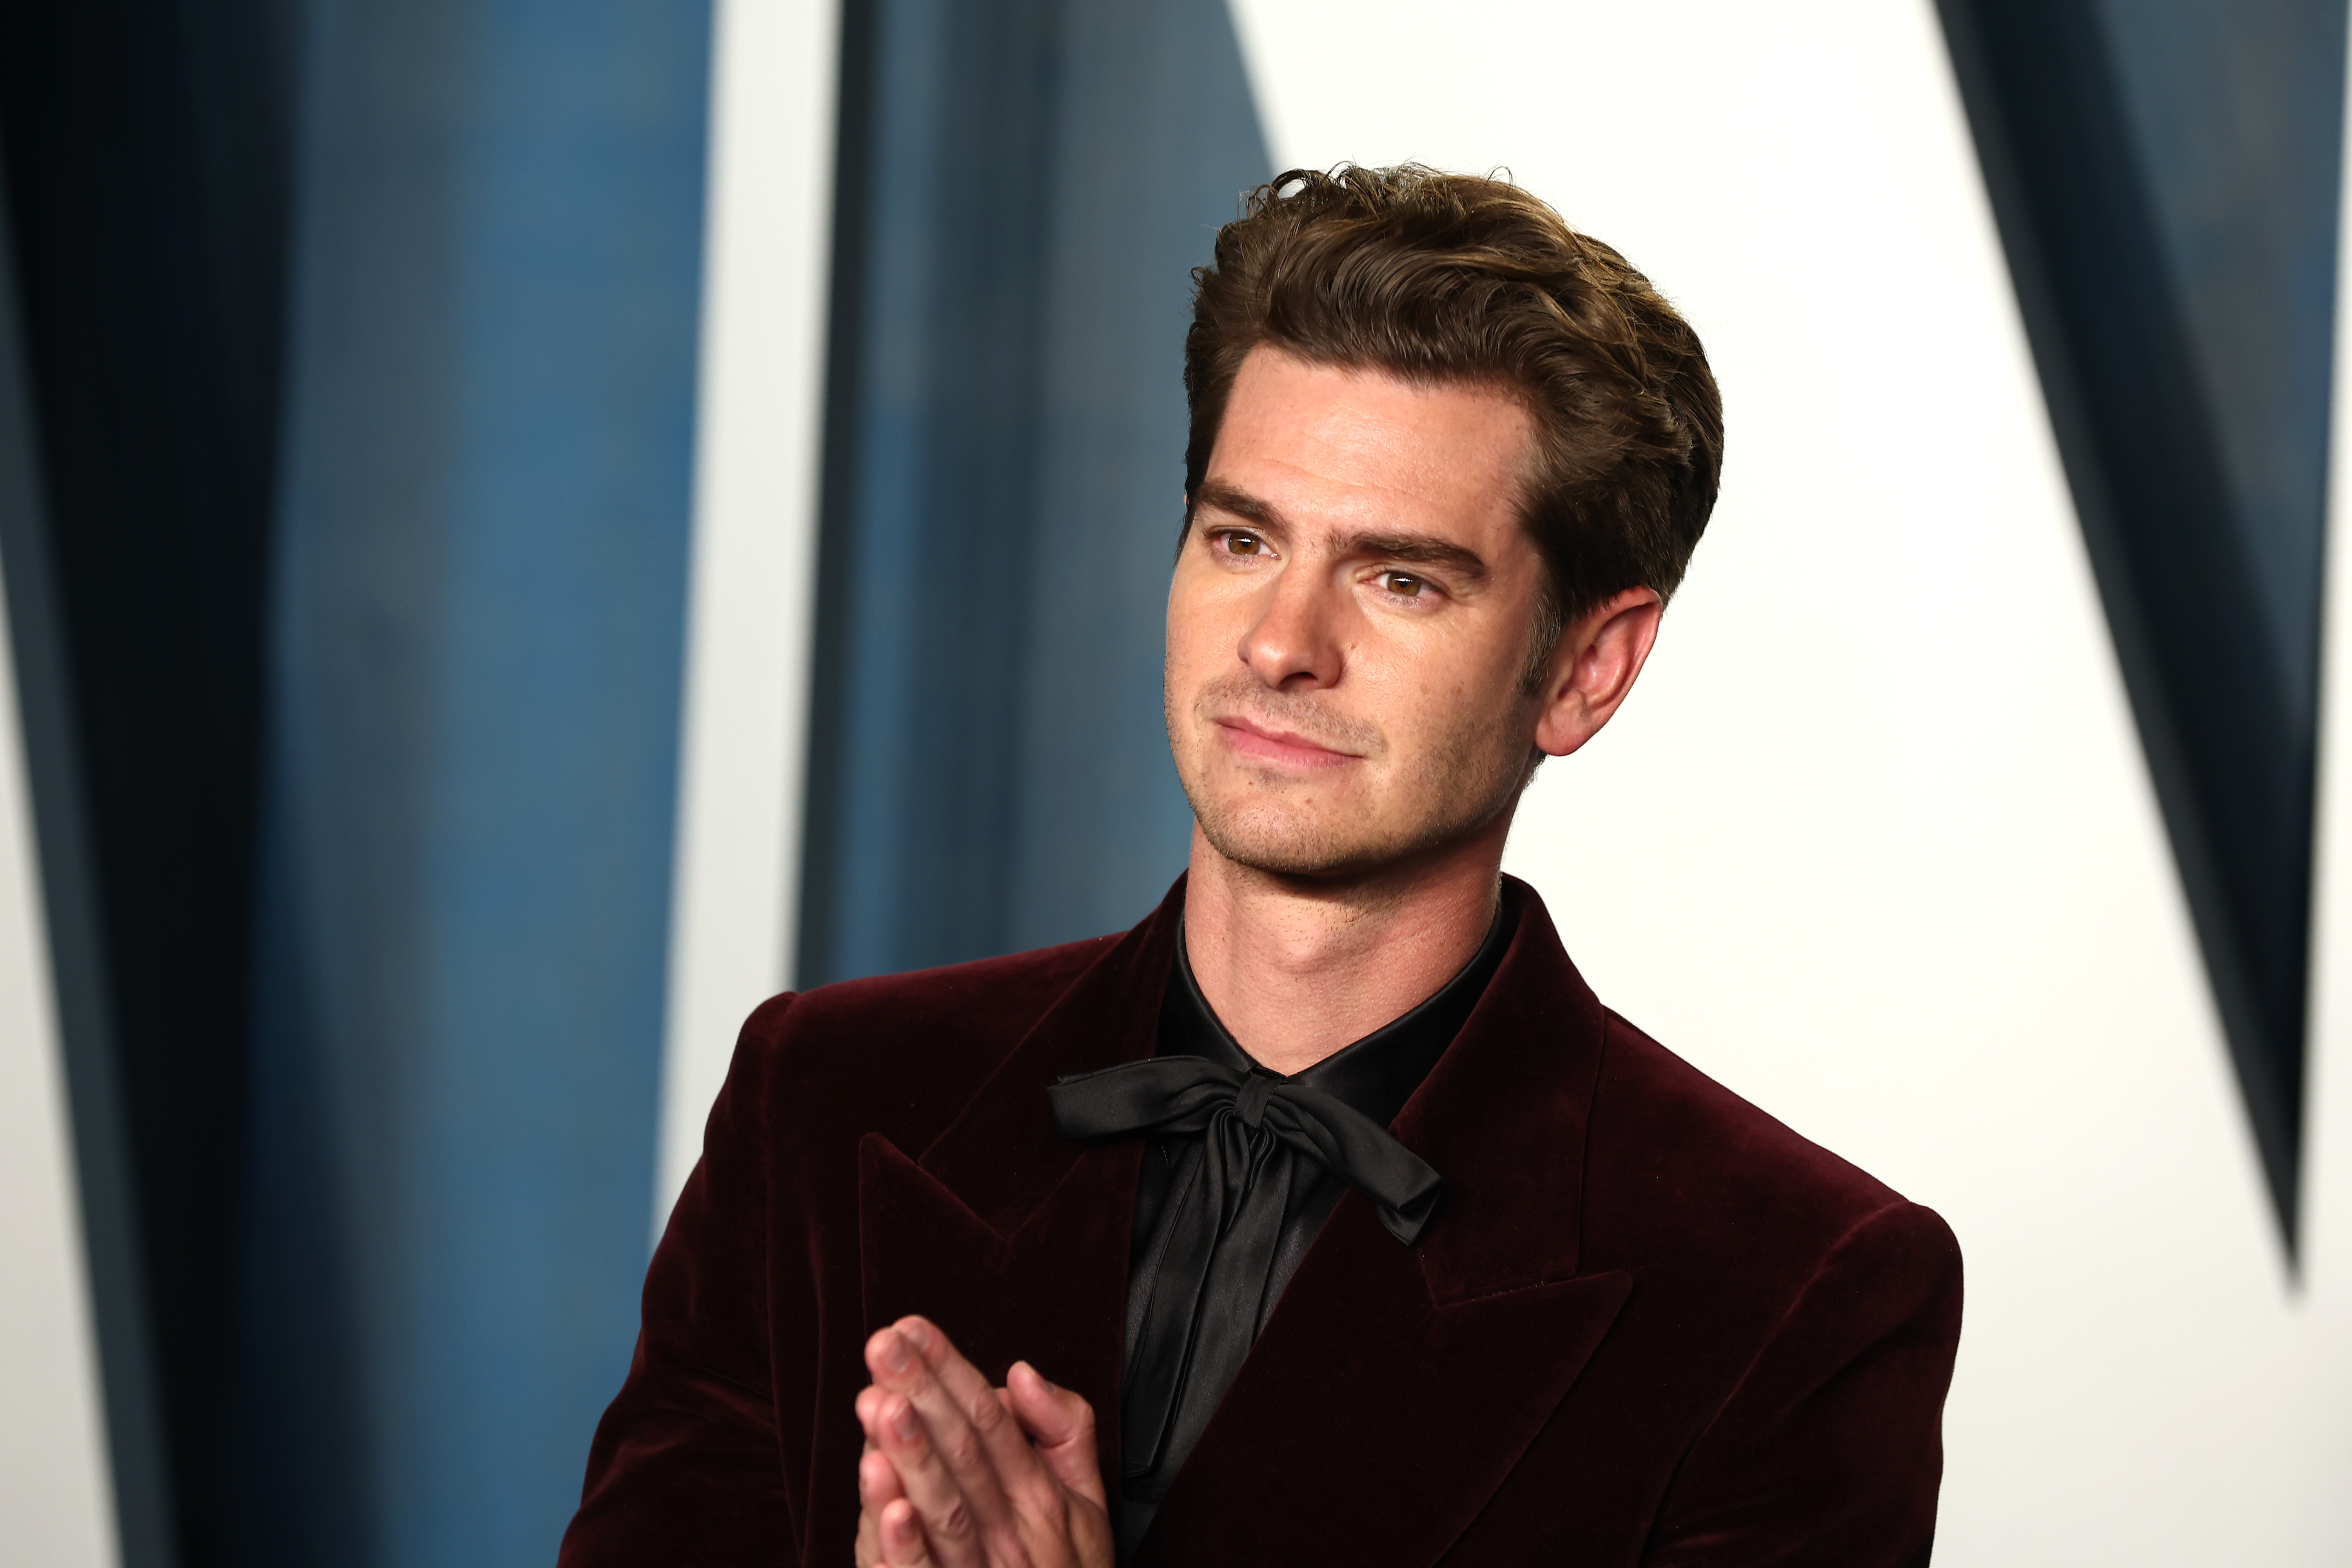 Andrew Garfield, star of 'Spider-Man: No Way Home,' wears a dark red velvet suit over a black button-up shirt and black tie.